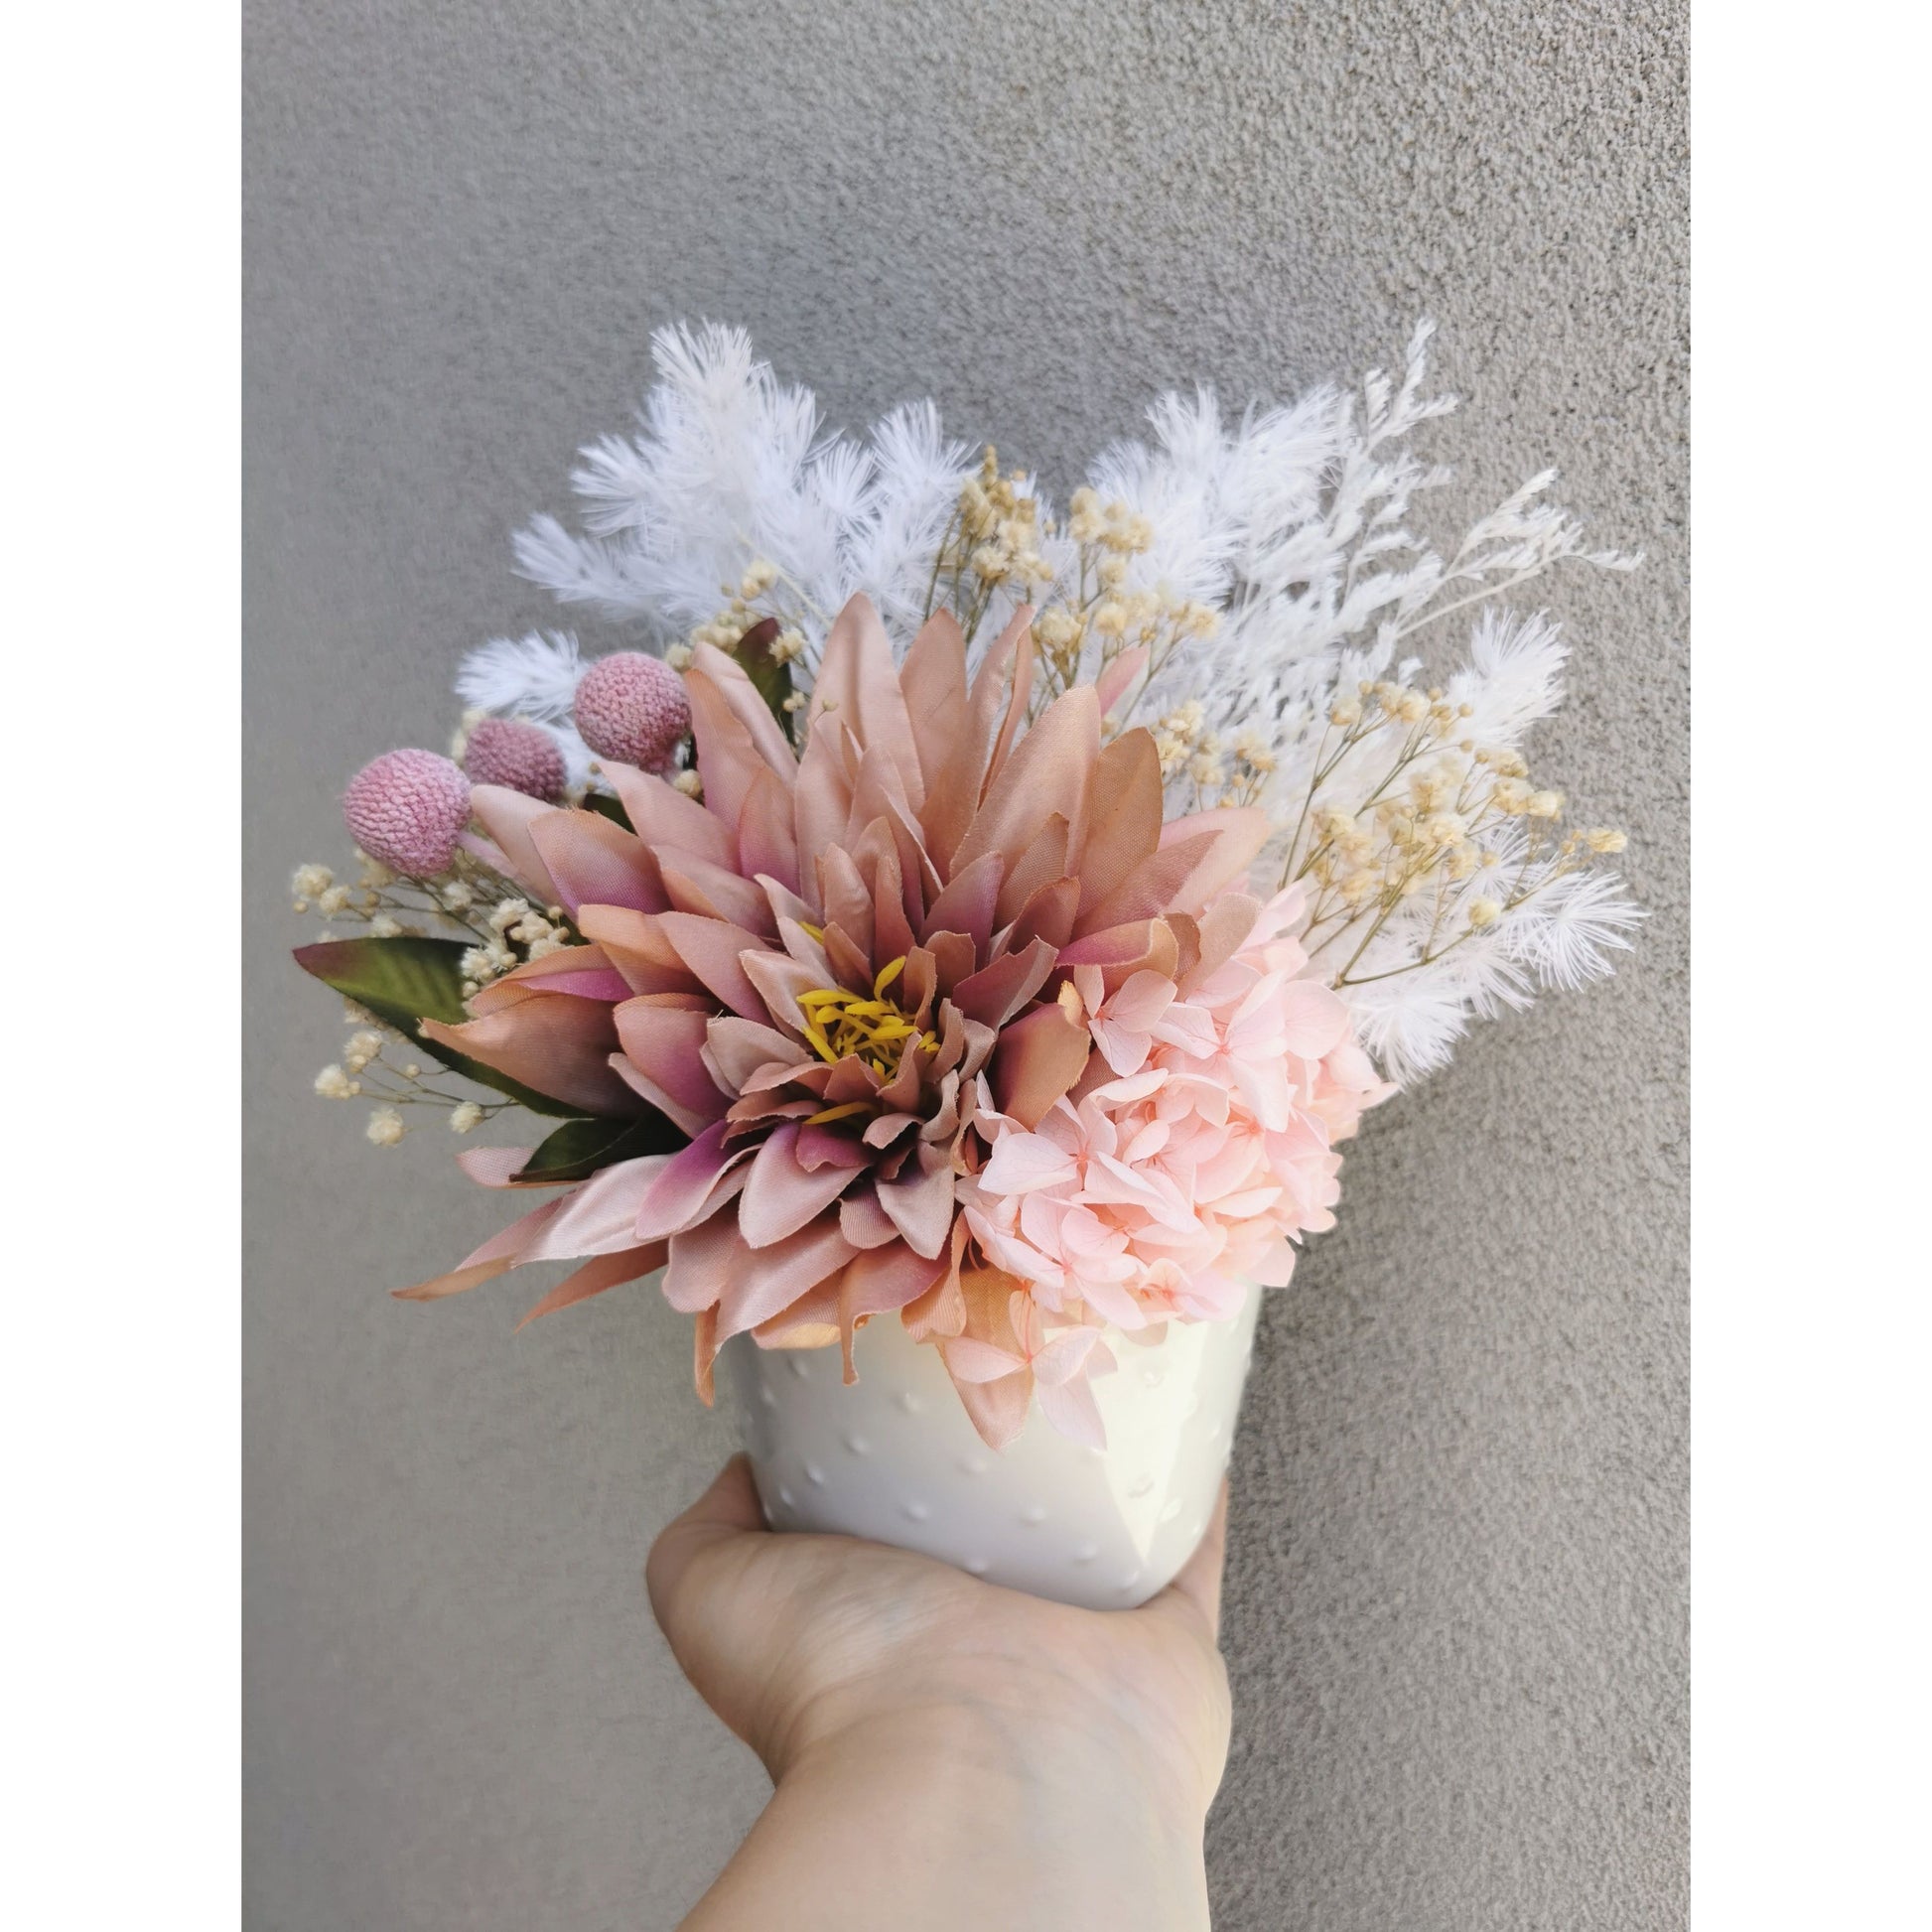 Dried & Preserved flower arrangement with silk artificial Dahlia flower. Photo shows arrangement being held by hand against a blank wall